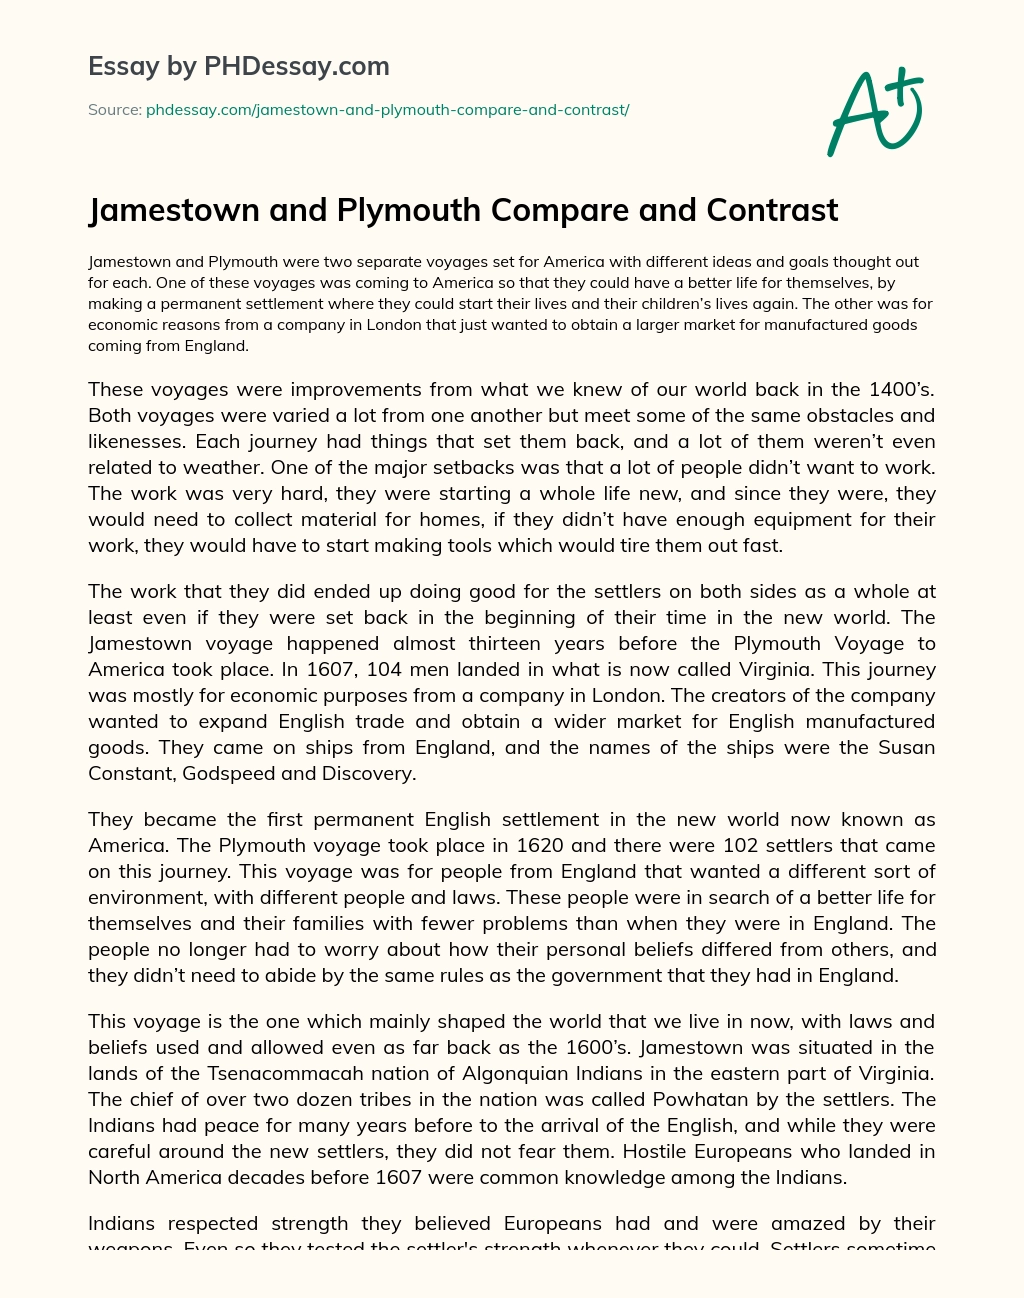 Jamestown and Plymouth Compare and Contrast essay